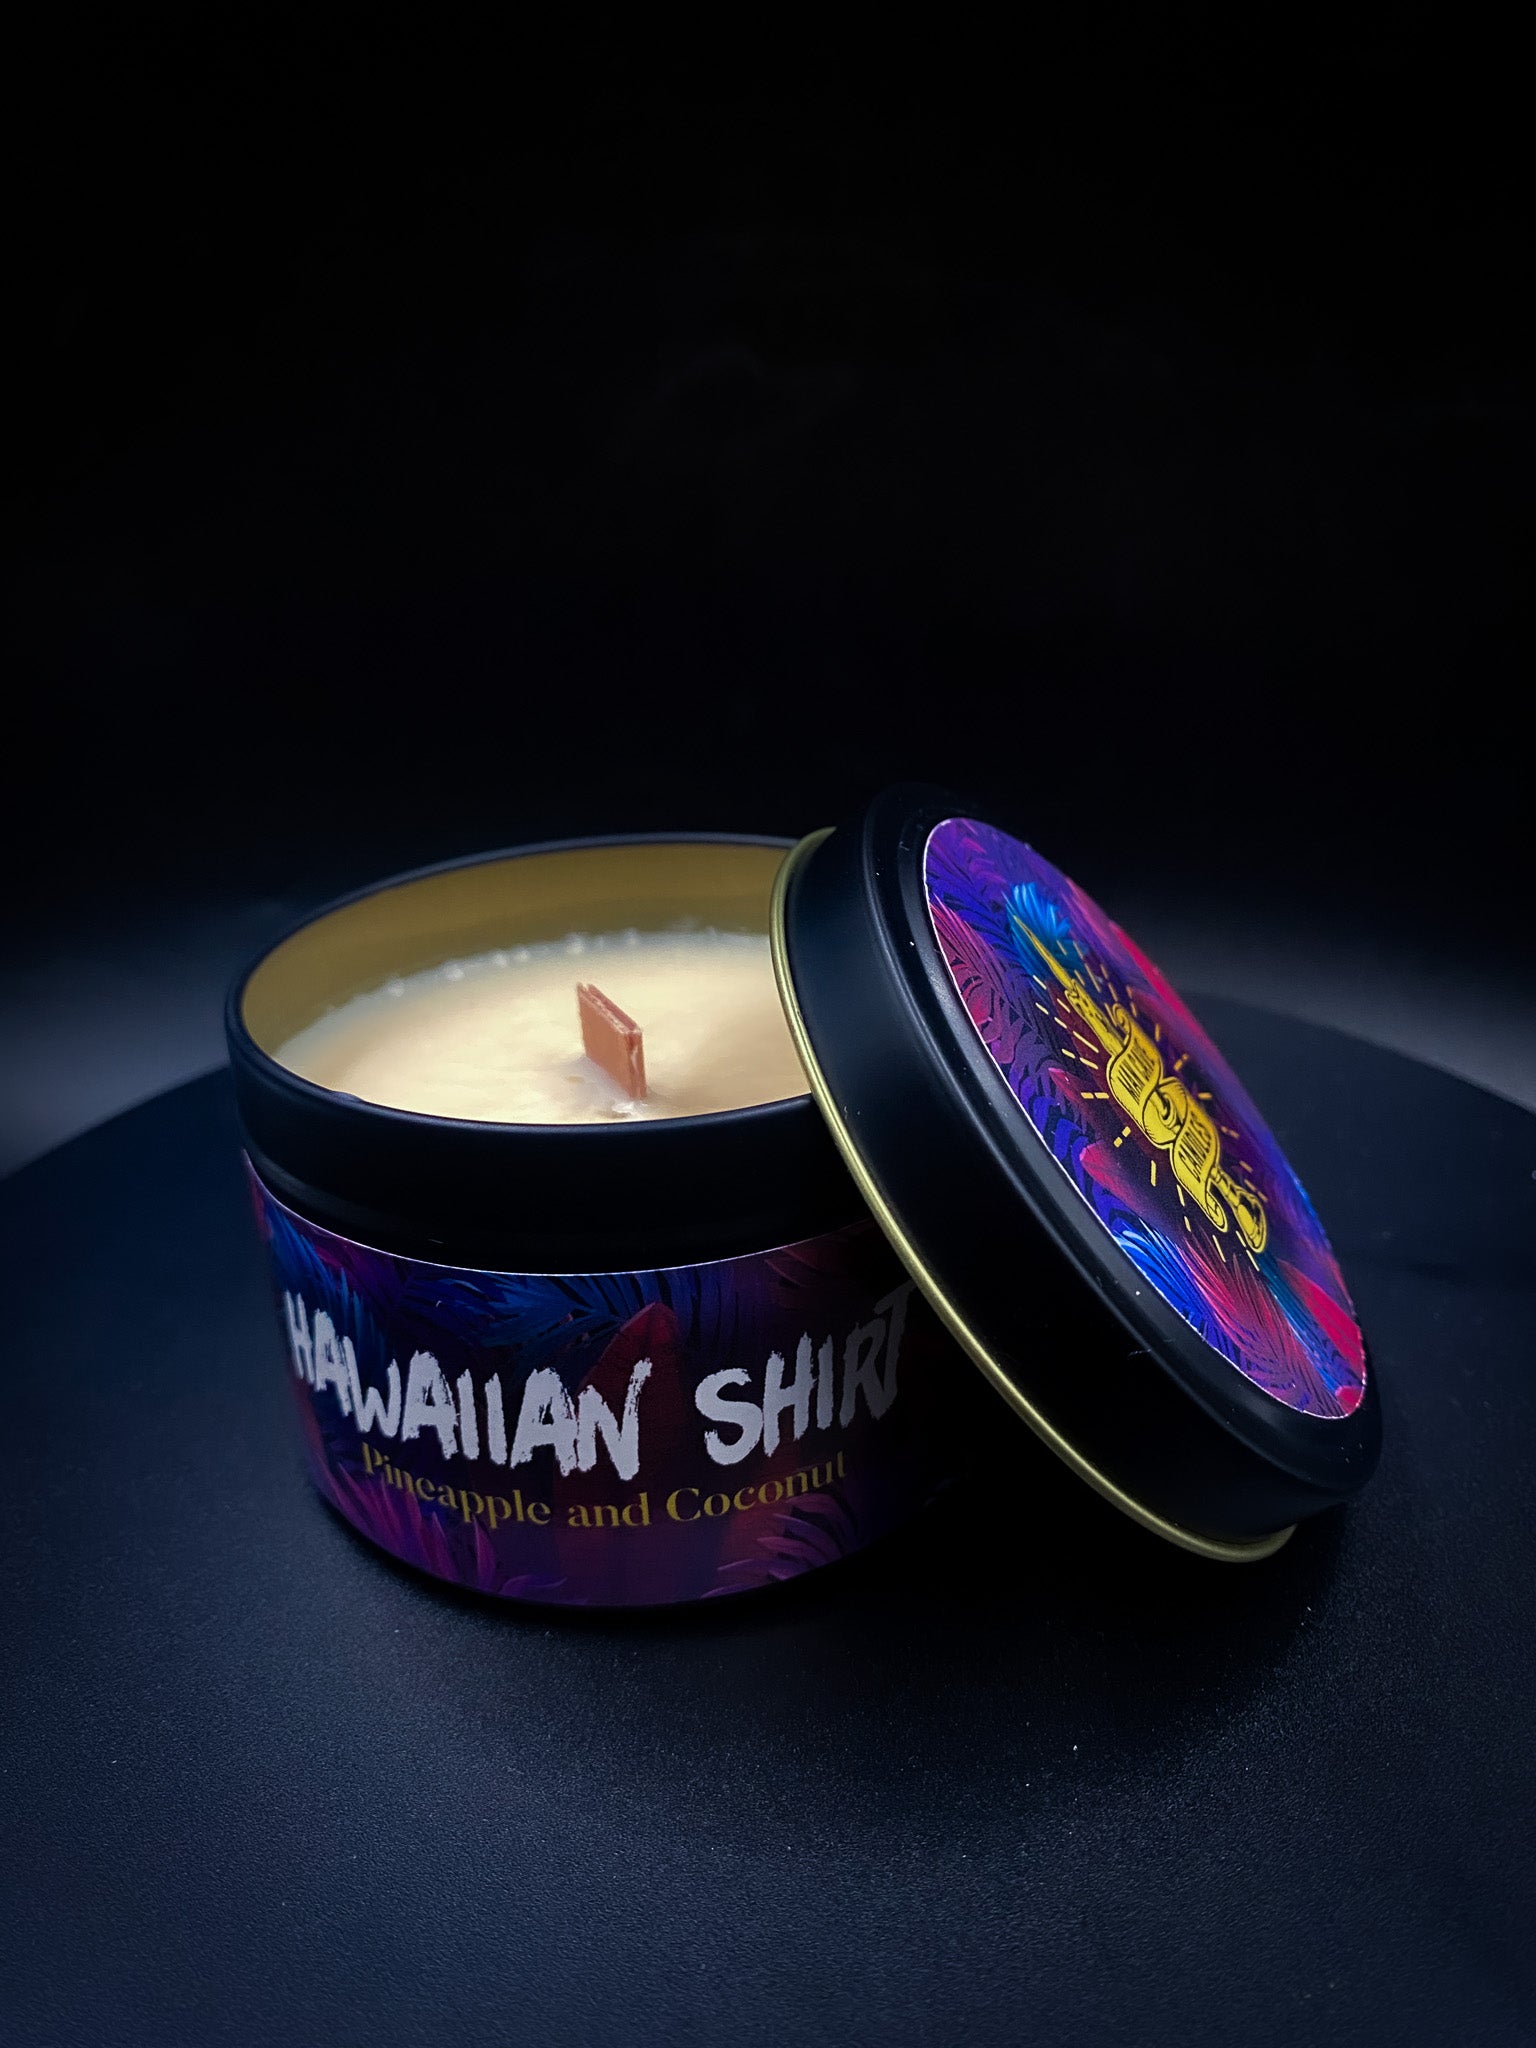 Hawaiian Shirt - Pineapple/Coconut Scented Man Cave Candle